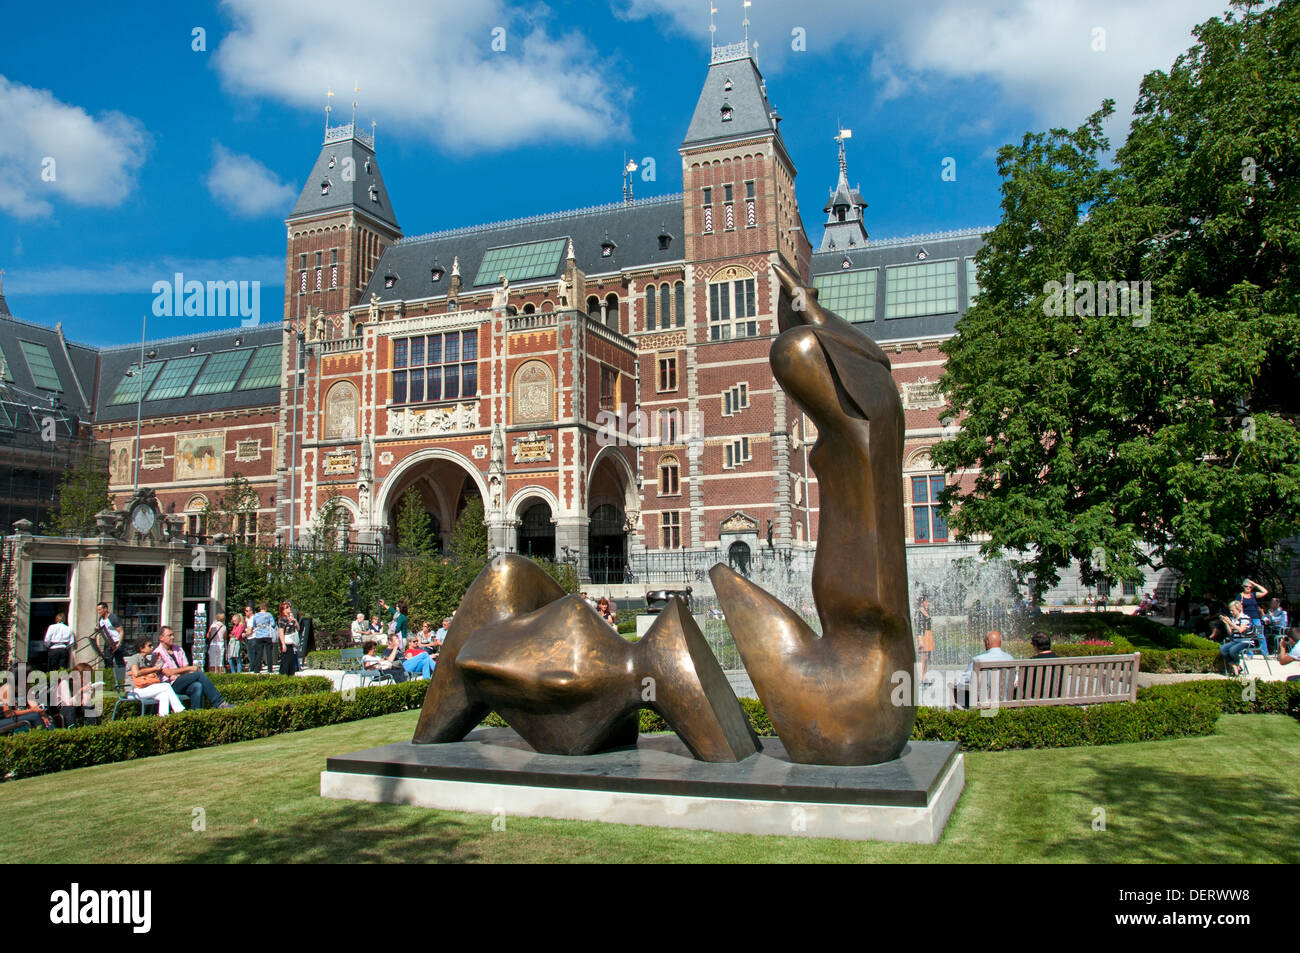 Two Piece Reclining Figure Cut 1979 Henry Spencer Moore 1898 – 1986  English sculptor England Rijksmuseum Amsterdam Netherlands Stock Photo